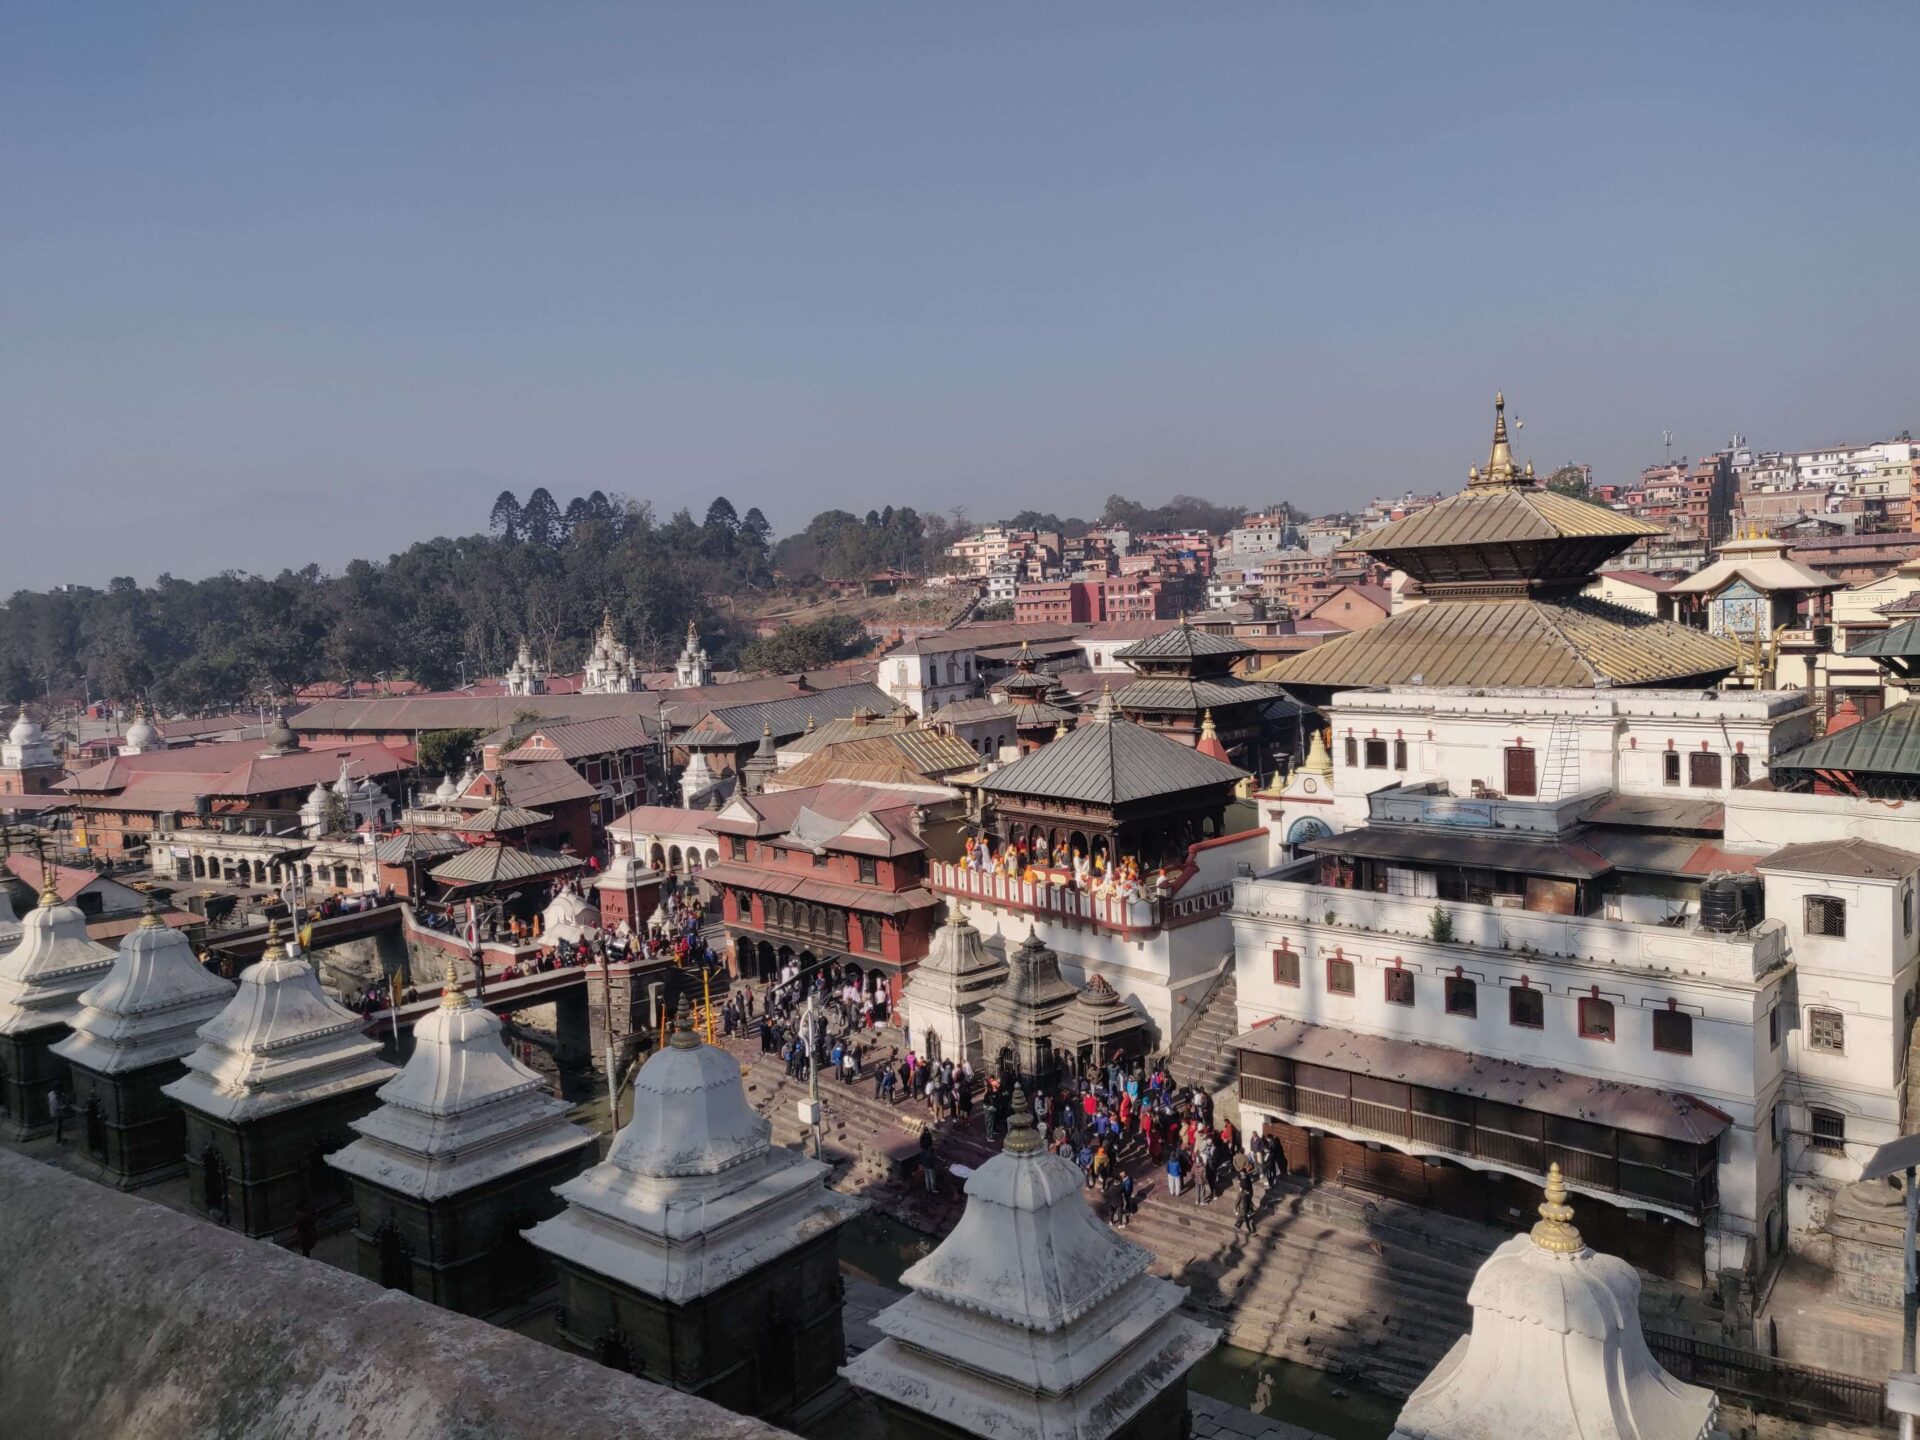 Crowded people at pahsupatinath temple during festival